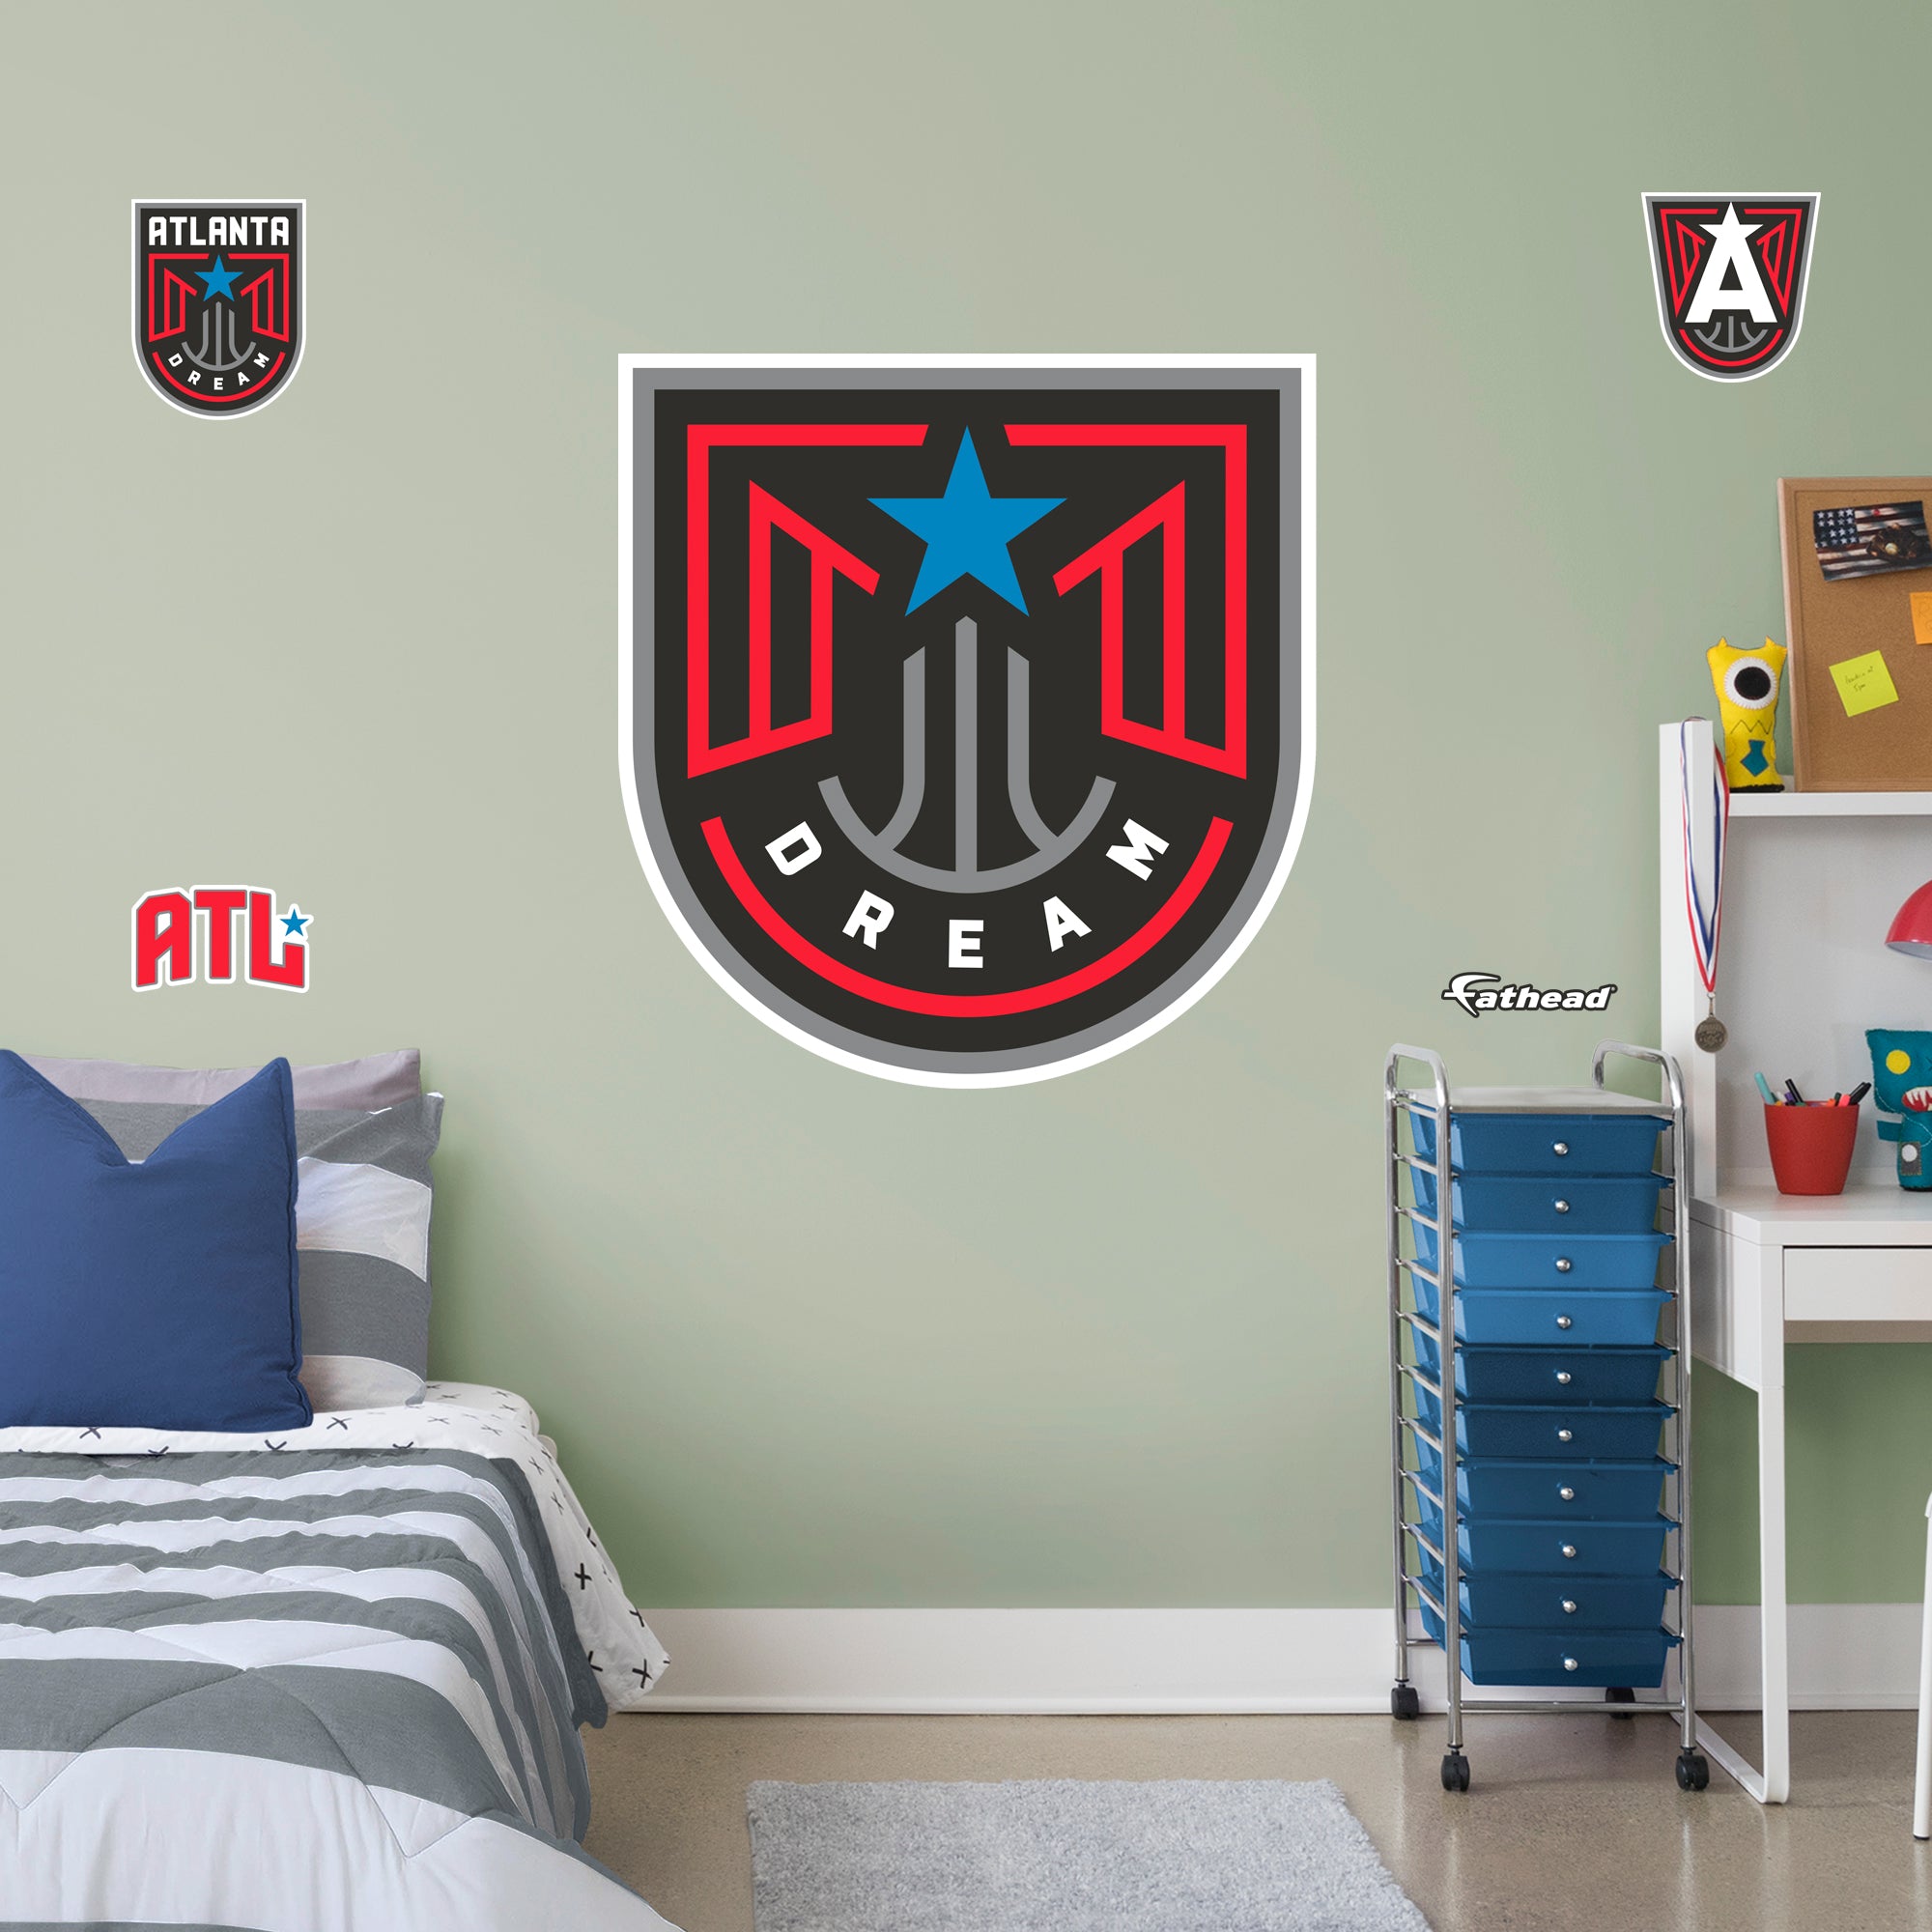 Atlanta Dream: Logo - Officially Licensed WNBA Removable Wall Decal Giant + 4 Decals by Fathead | Vinyl